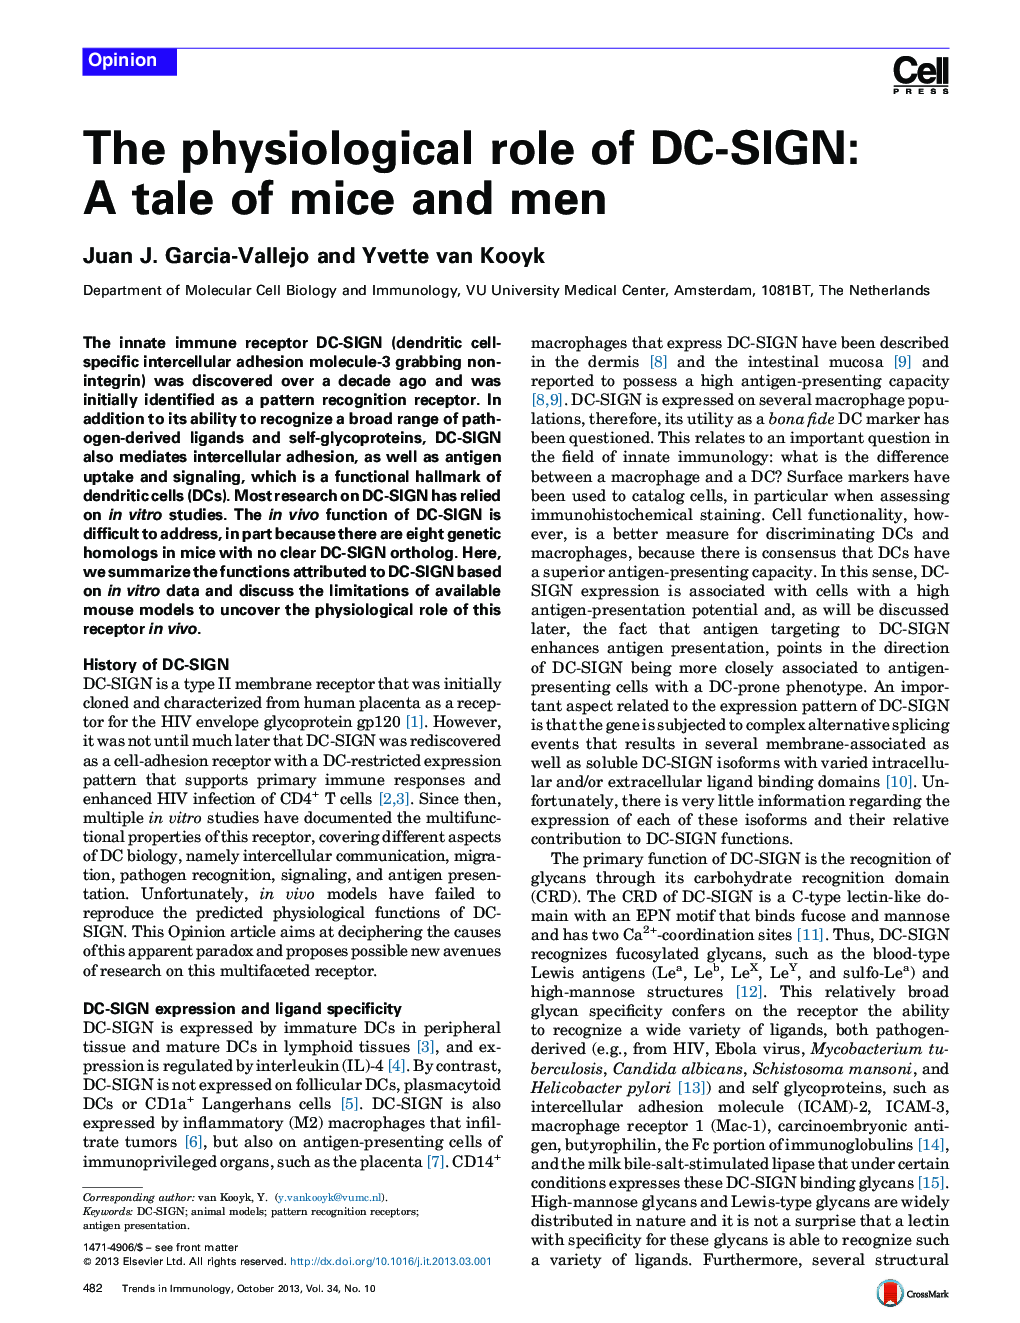 The physiological role of DC-SIGN: A tale of mice and men